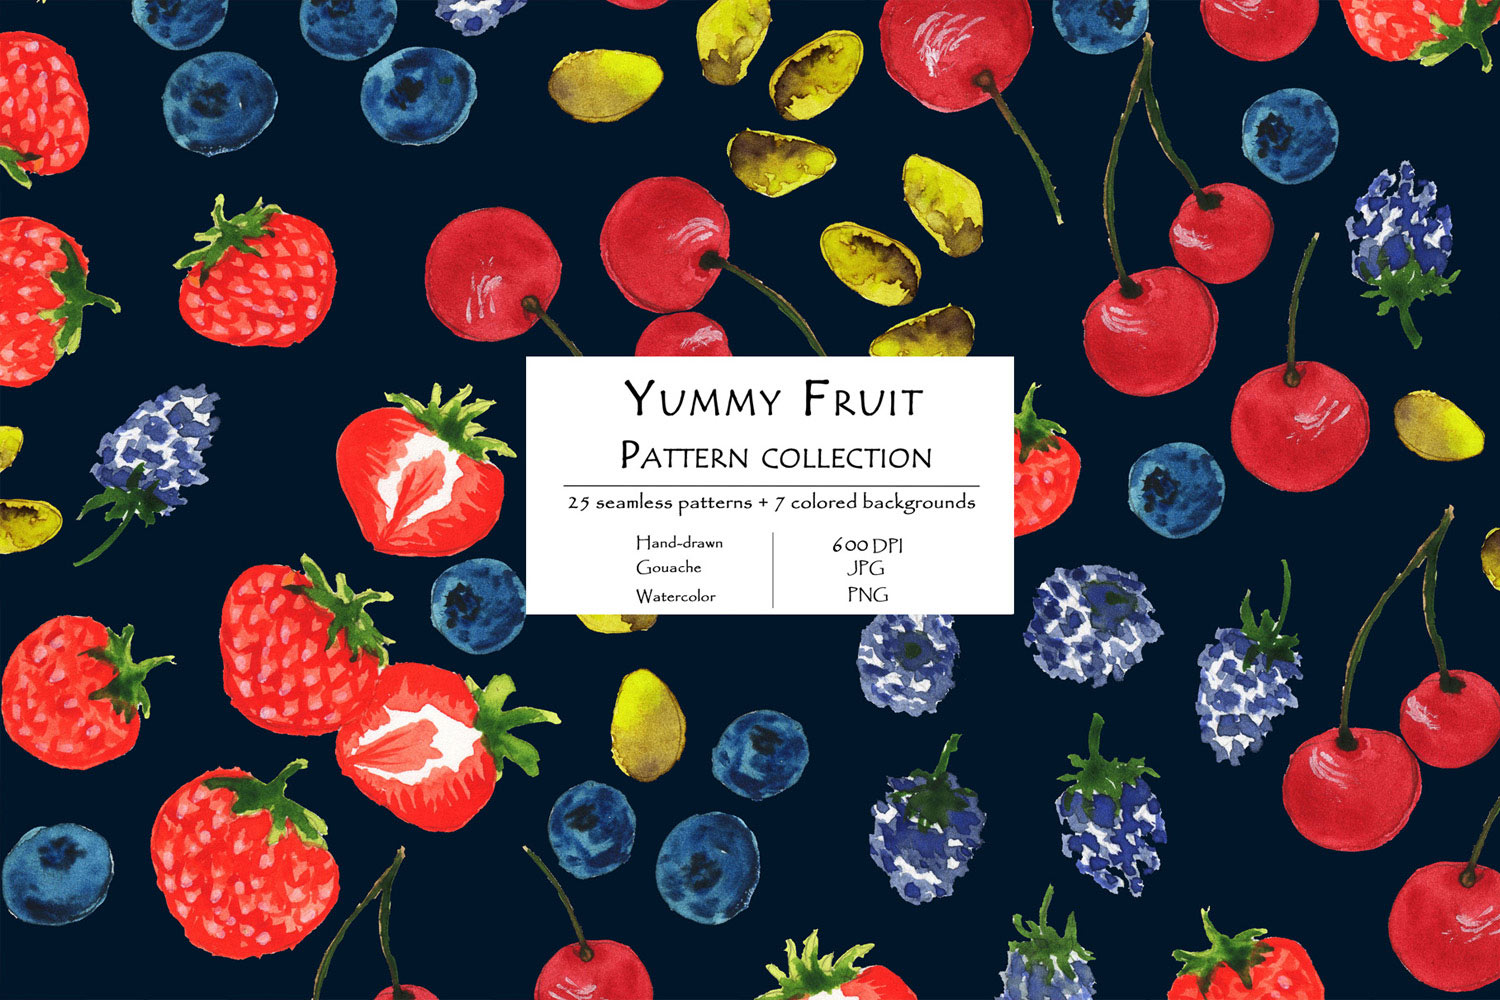 Yummy Fruit Pattern Collection With 25 Seamless Patterns And 7 Backgrounds Berries Example.